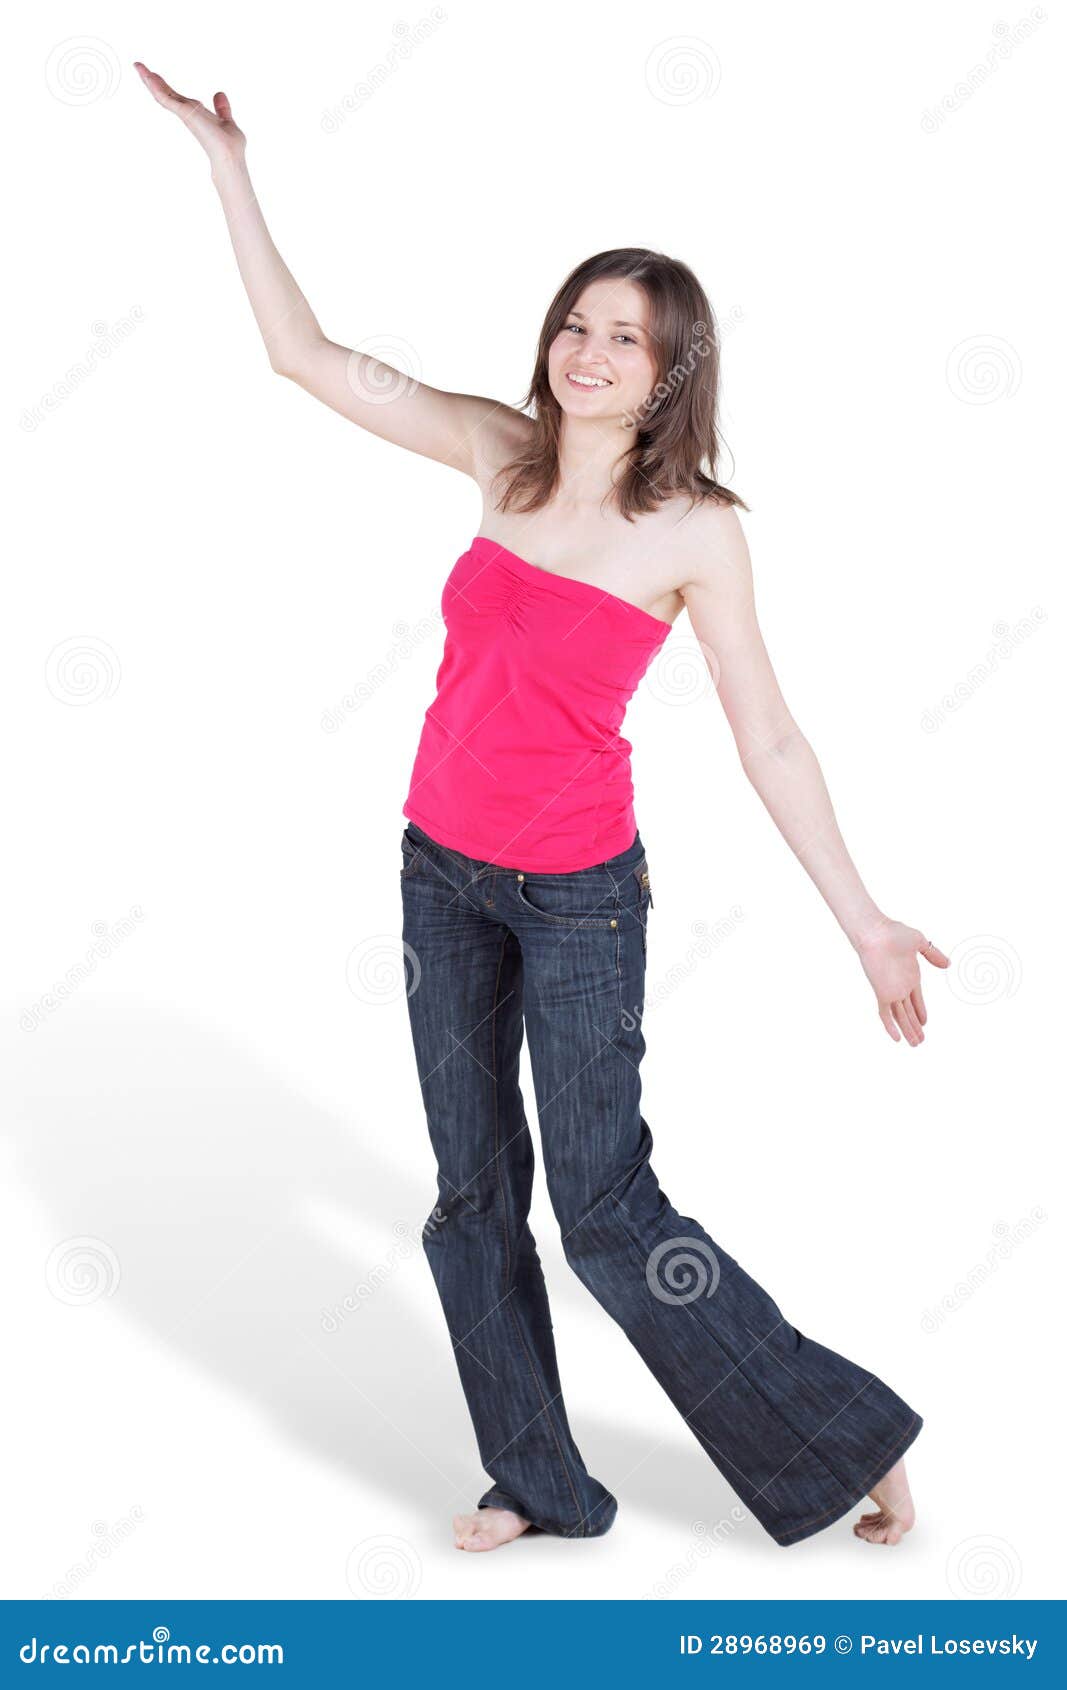 dancing barefooted young woman